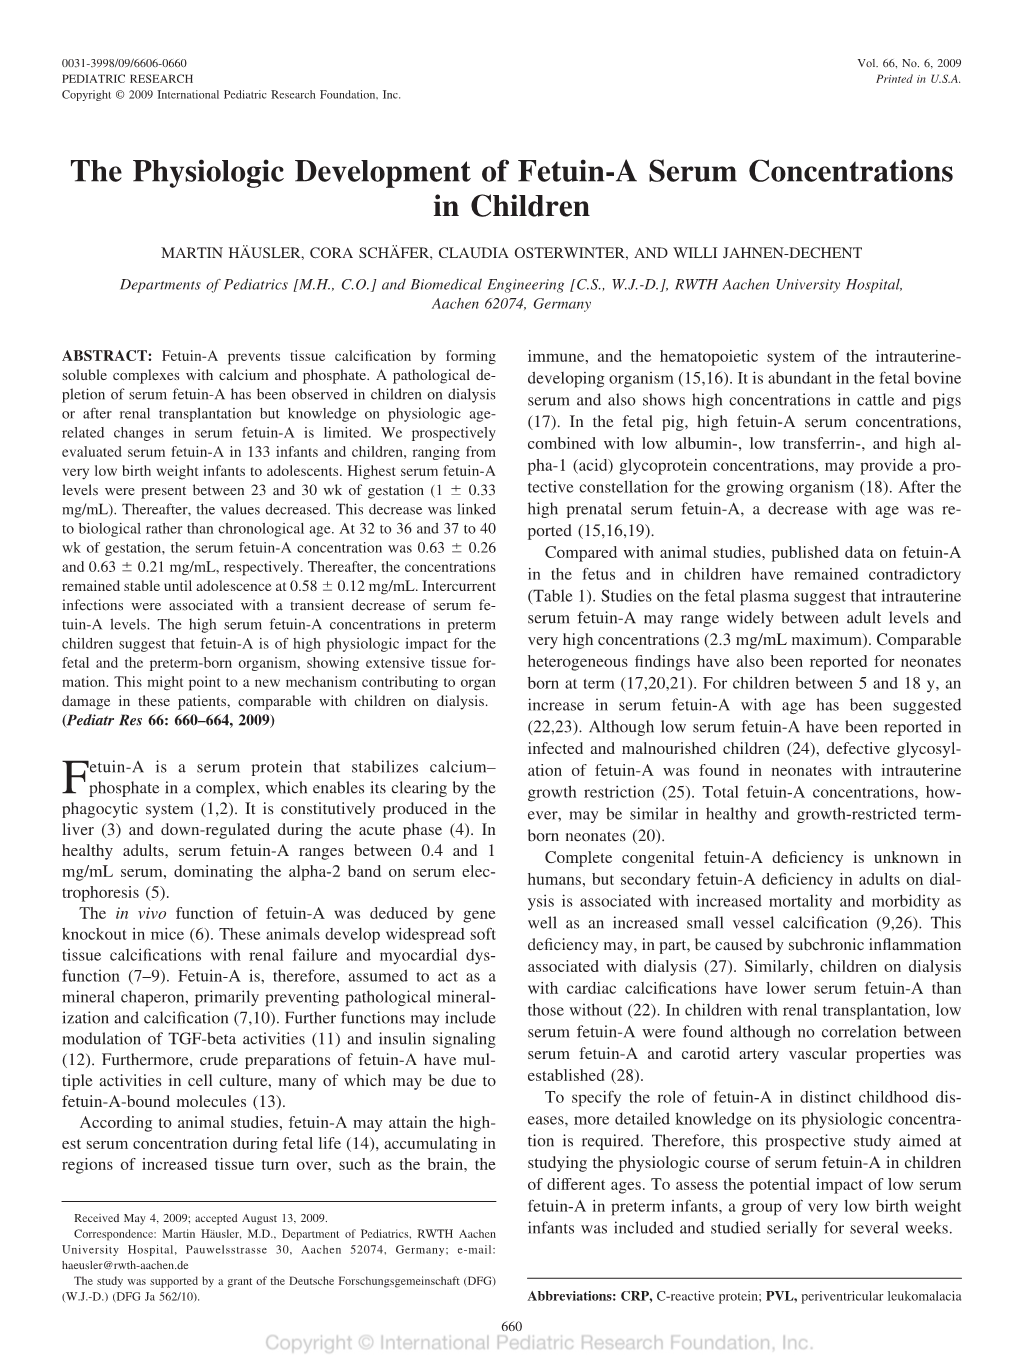 The Physiologic Development of Fetuin-A Serum Concentrations in Children